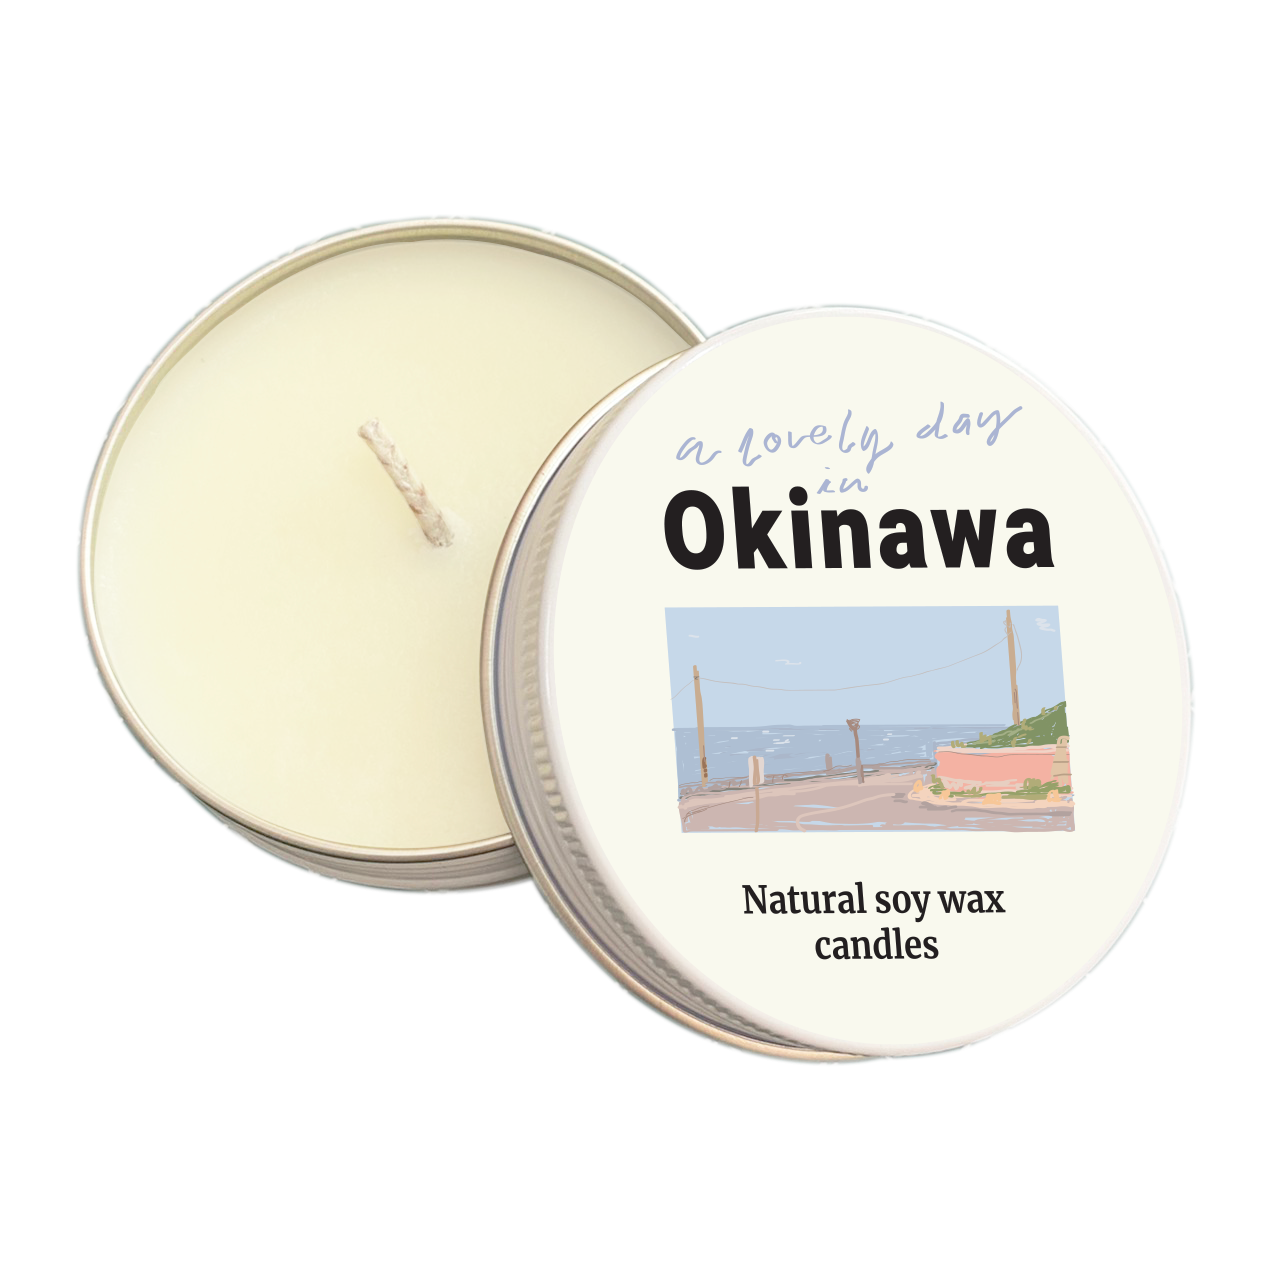 A lovely day in Okinawa soy candles